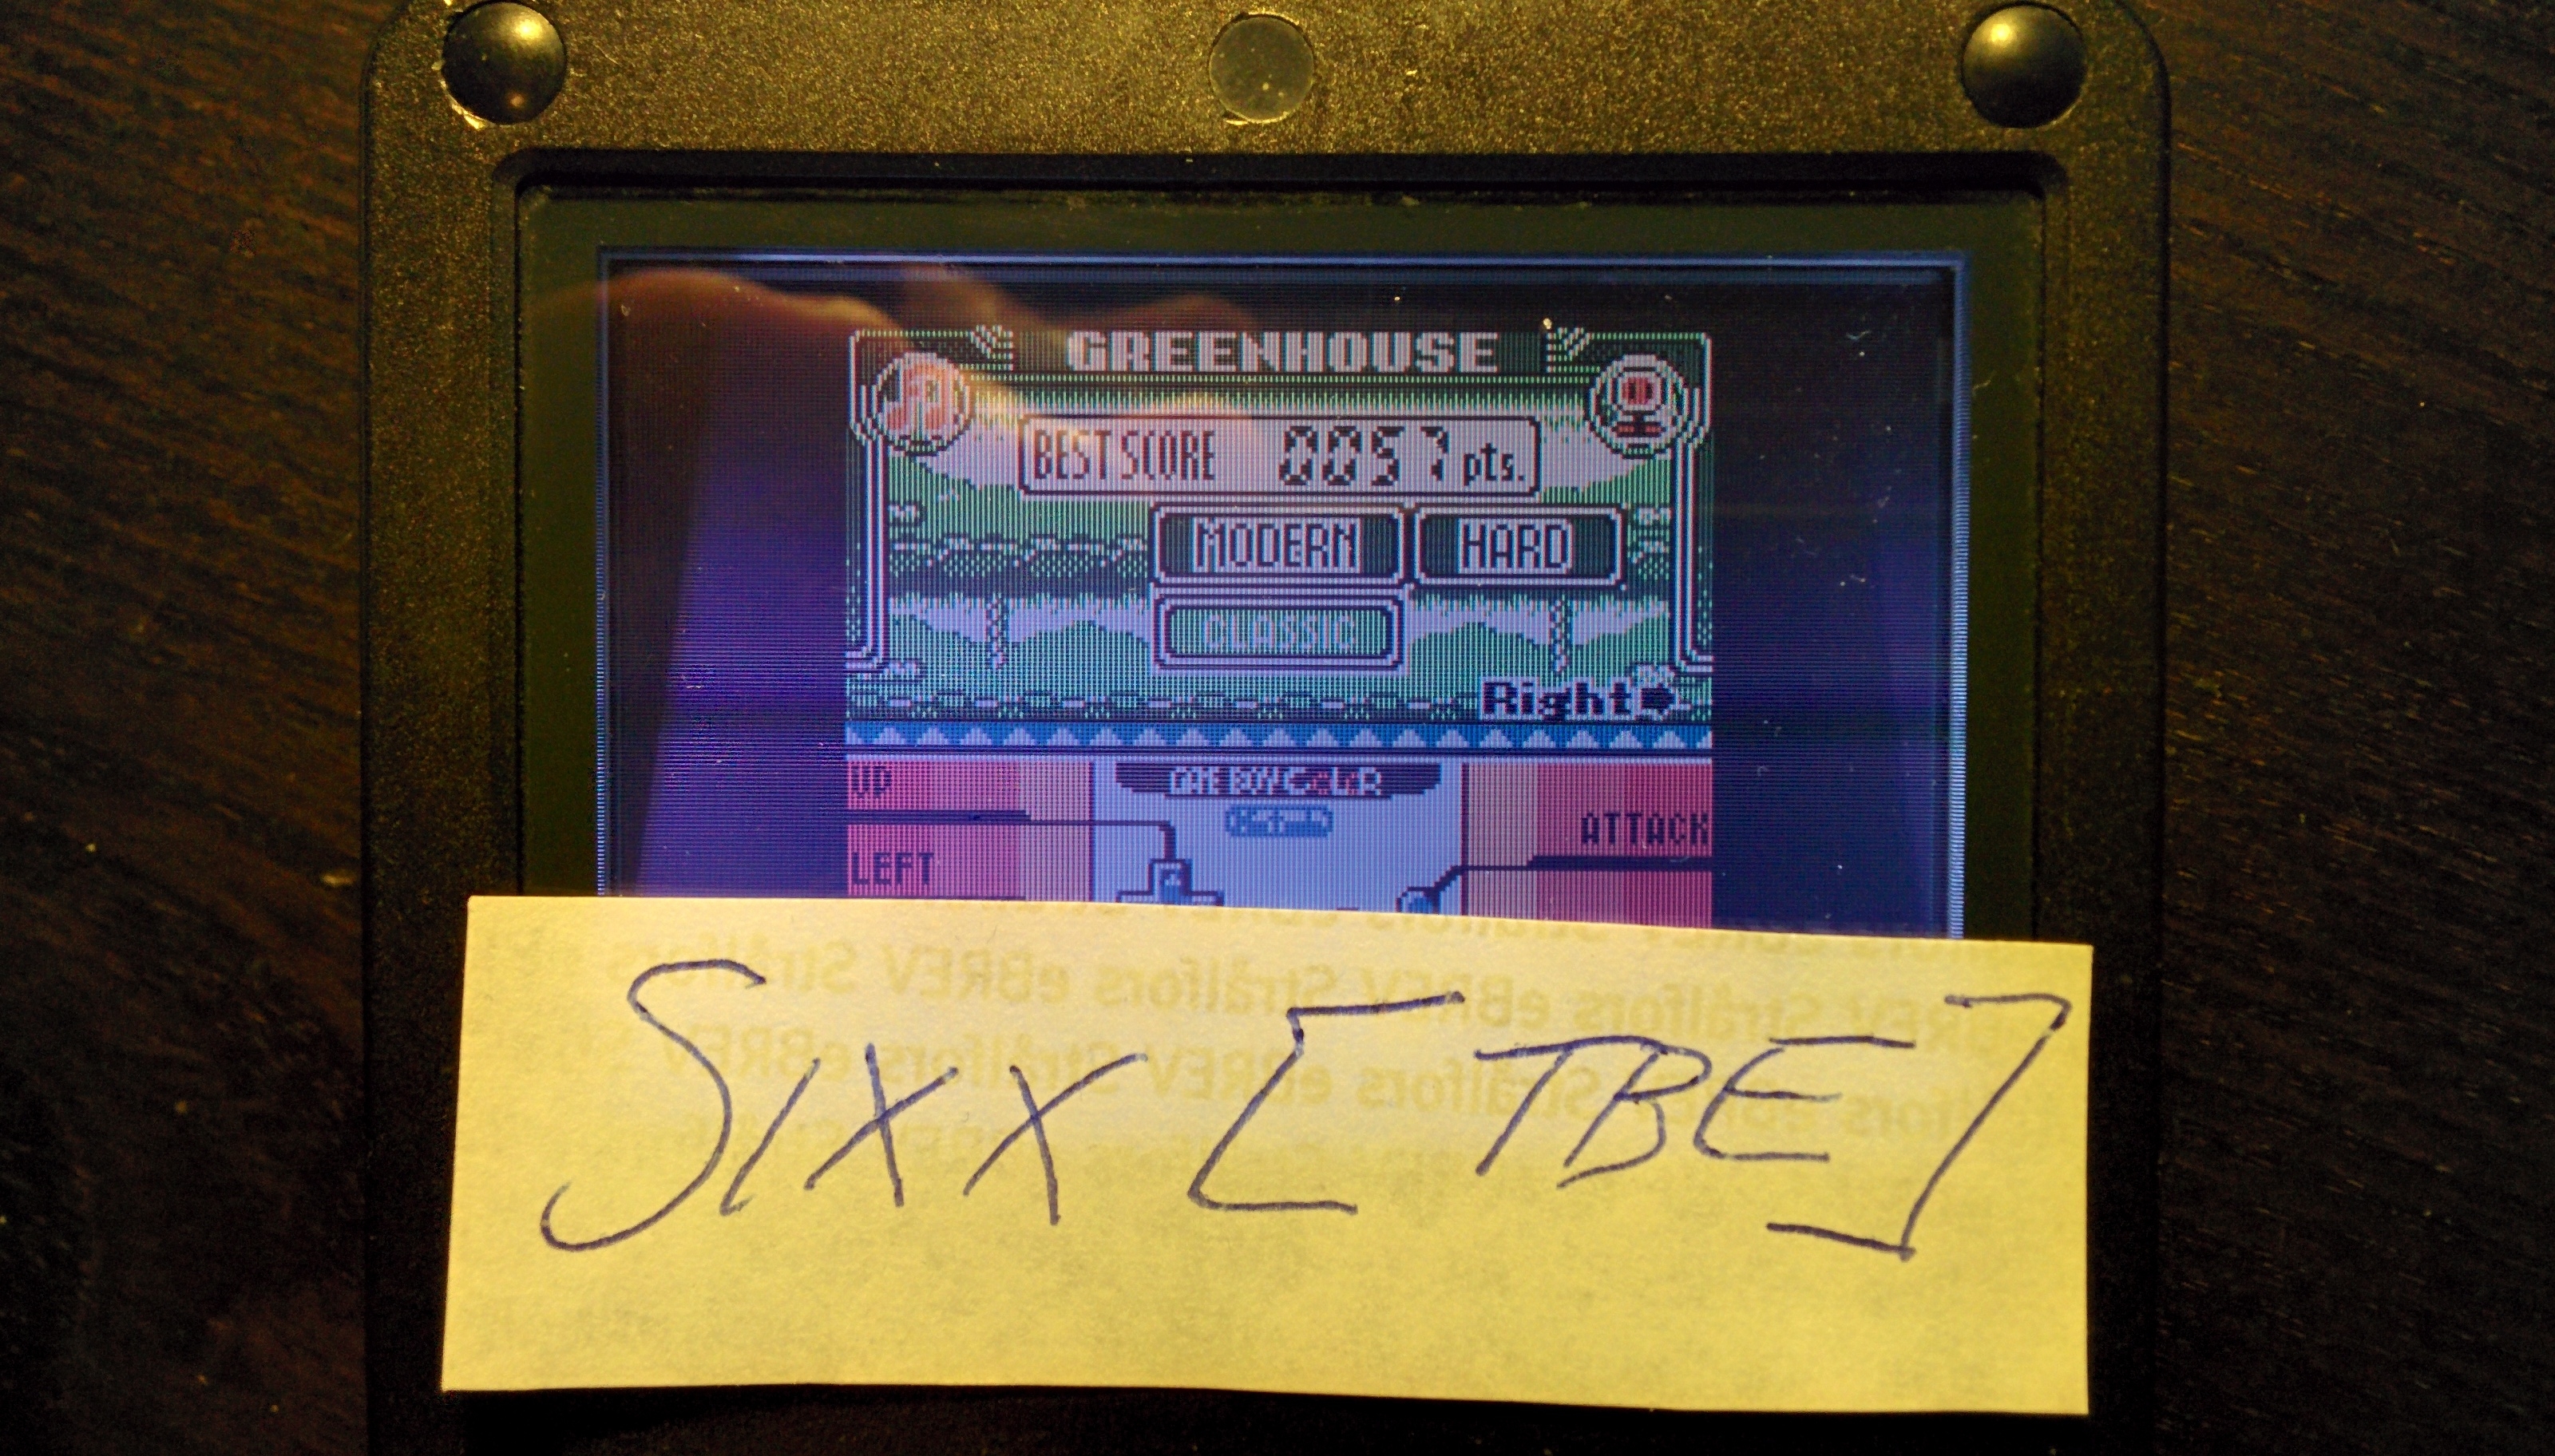 Sixx: Game & Watch Gallery 3: Greenhouse: Modern: Hard (Game Boy Color) 57 points on 2014-09-17 02:10:15